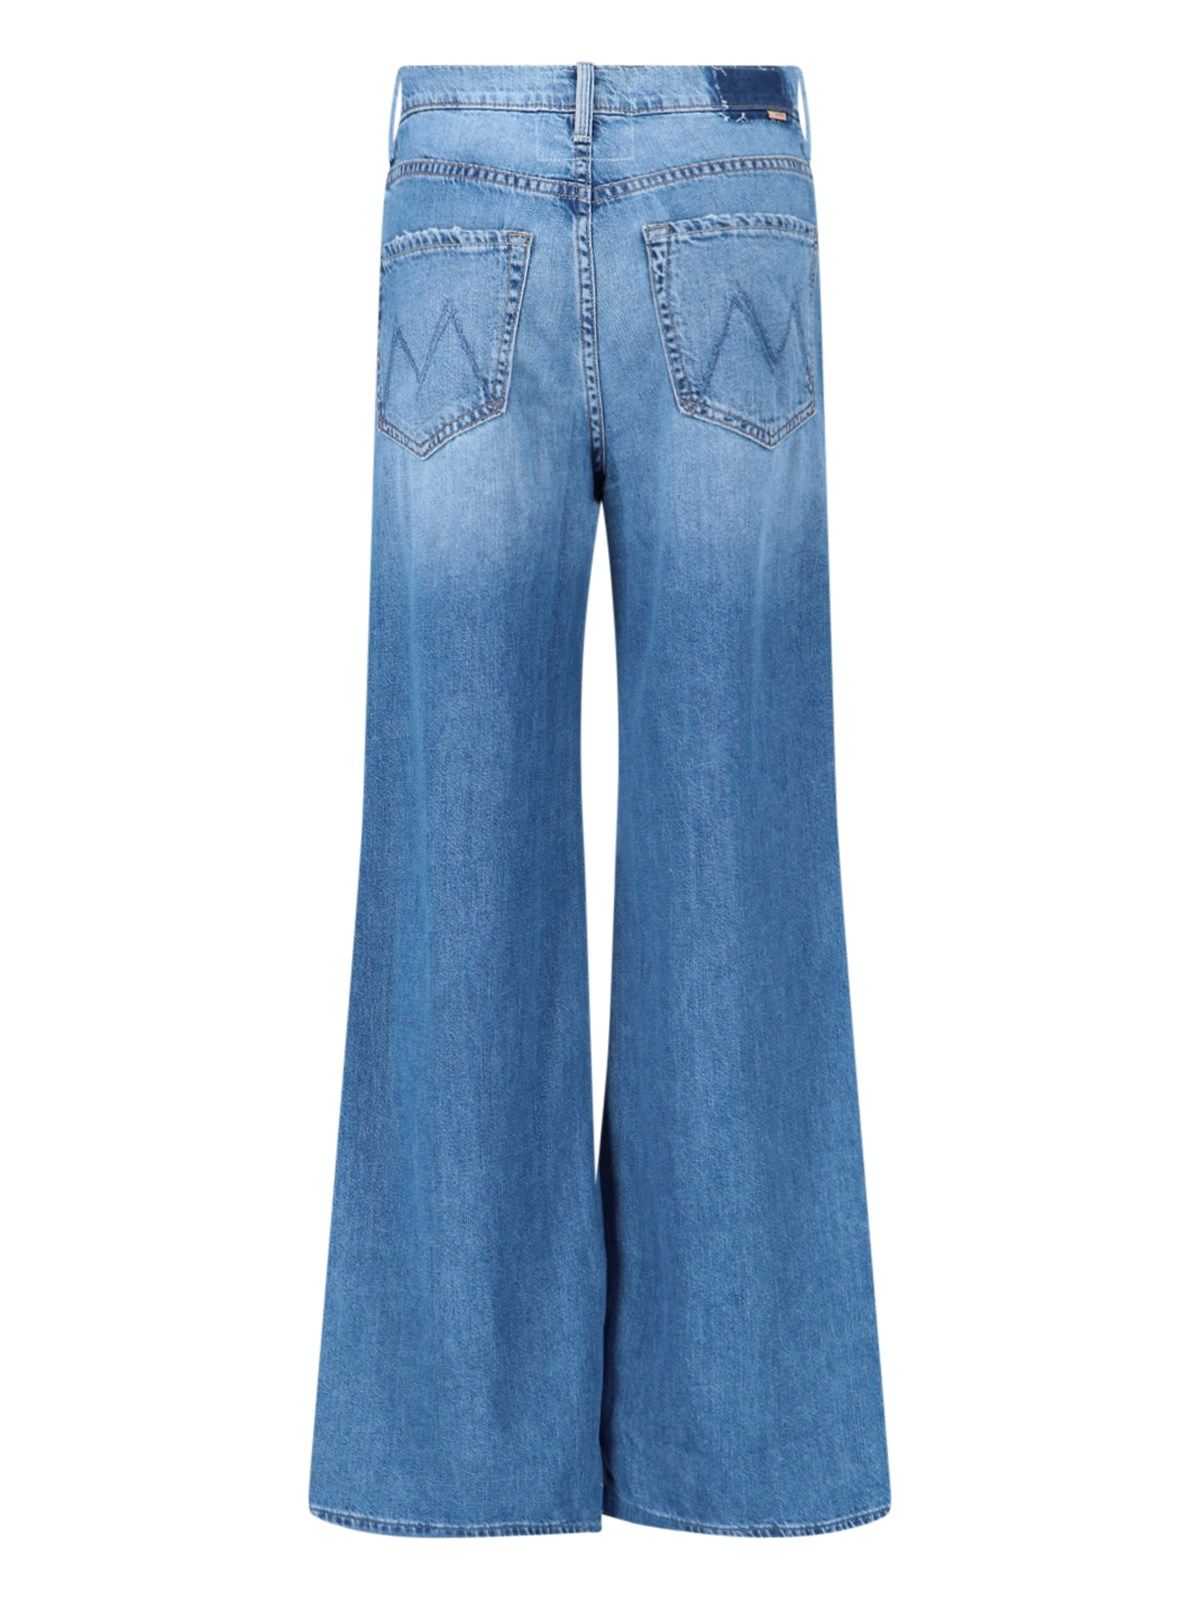 Jeans "The Ditcher Roller Sneak"